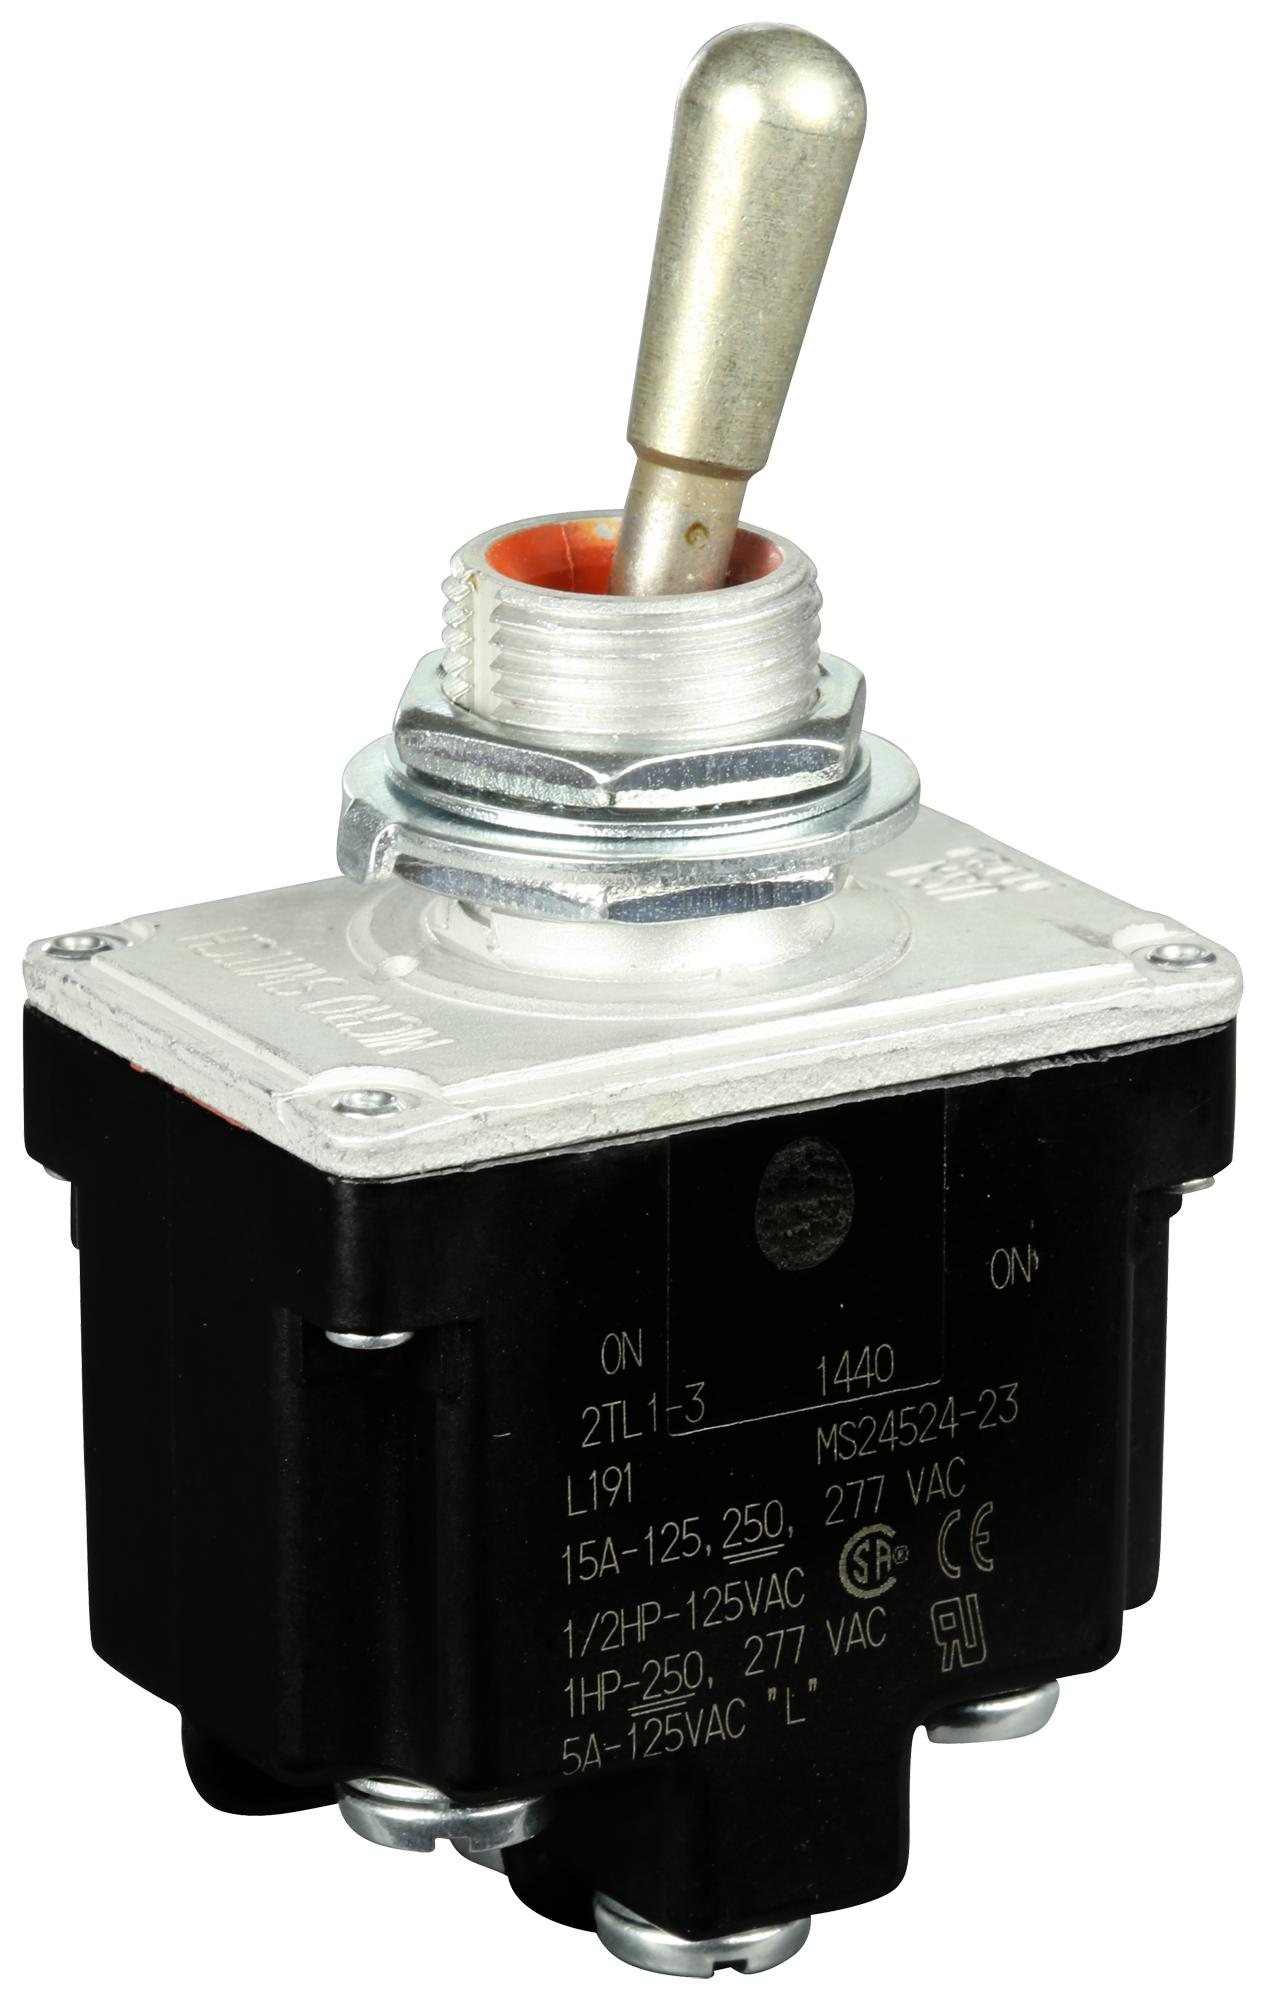 2TL1-1E TOGGLE SWITCH, DPDT, 20A, 277VAC/250VDC HONEYWELL